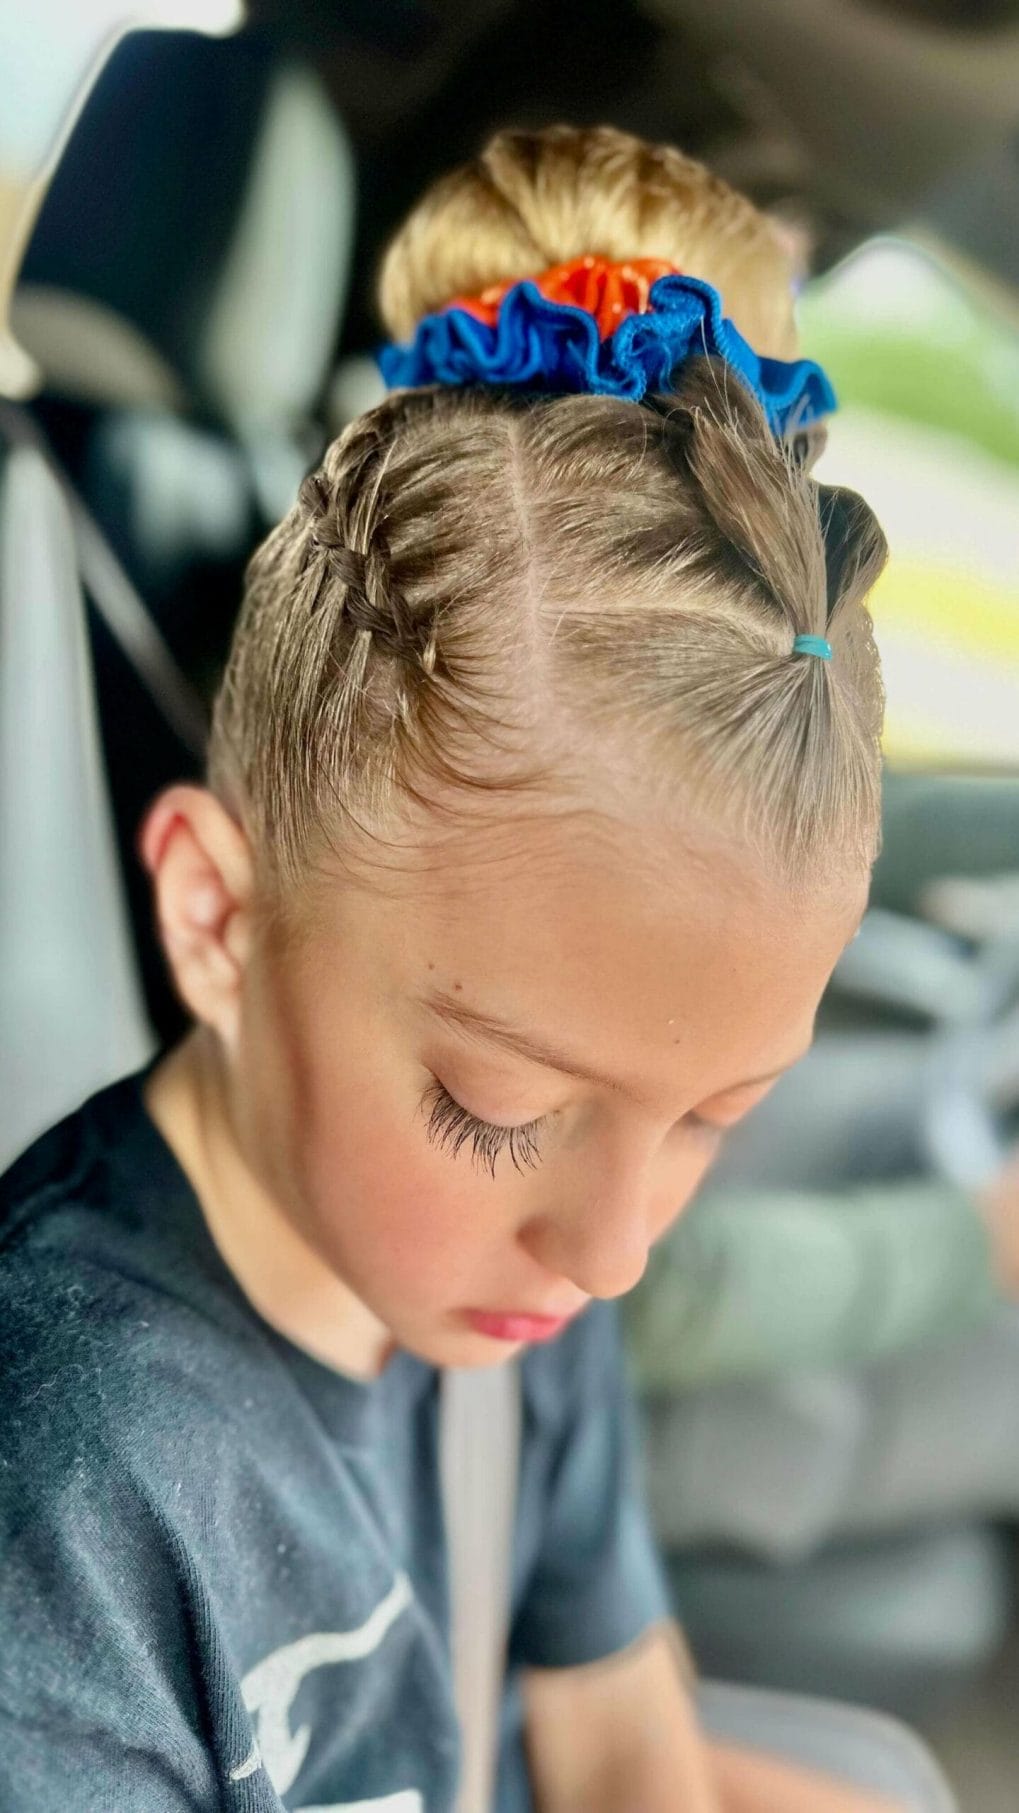 Tight braids leading to a playful bun secured with a vibrant blue and red scrunchie for a fun gymnastics style